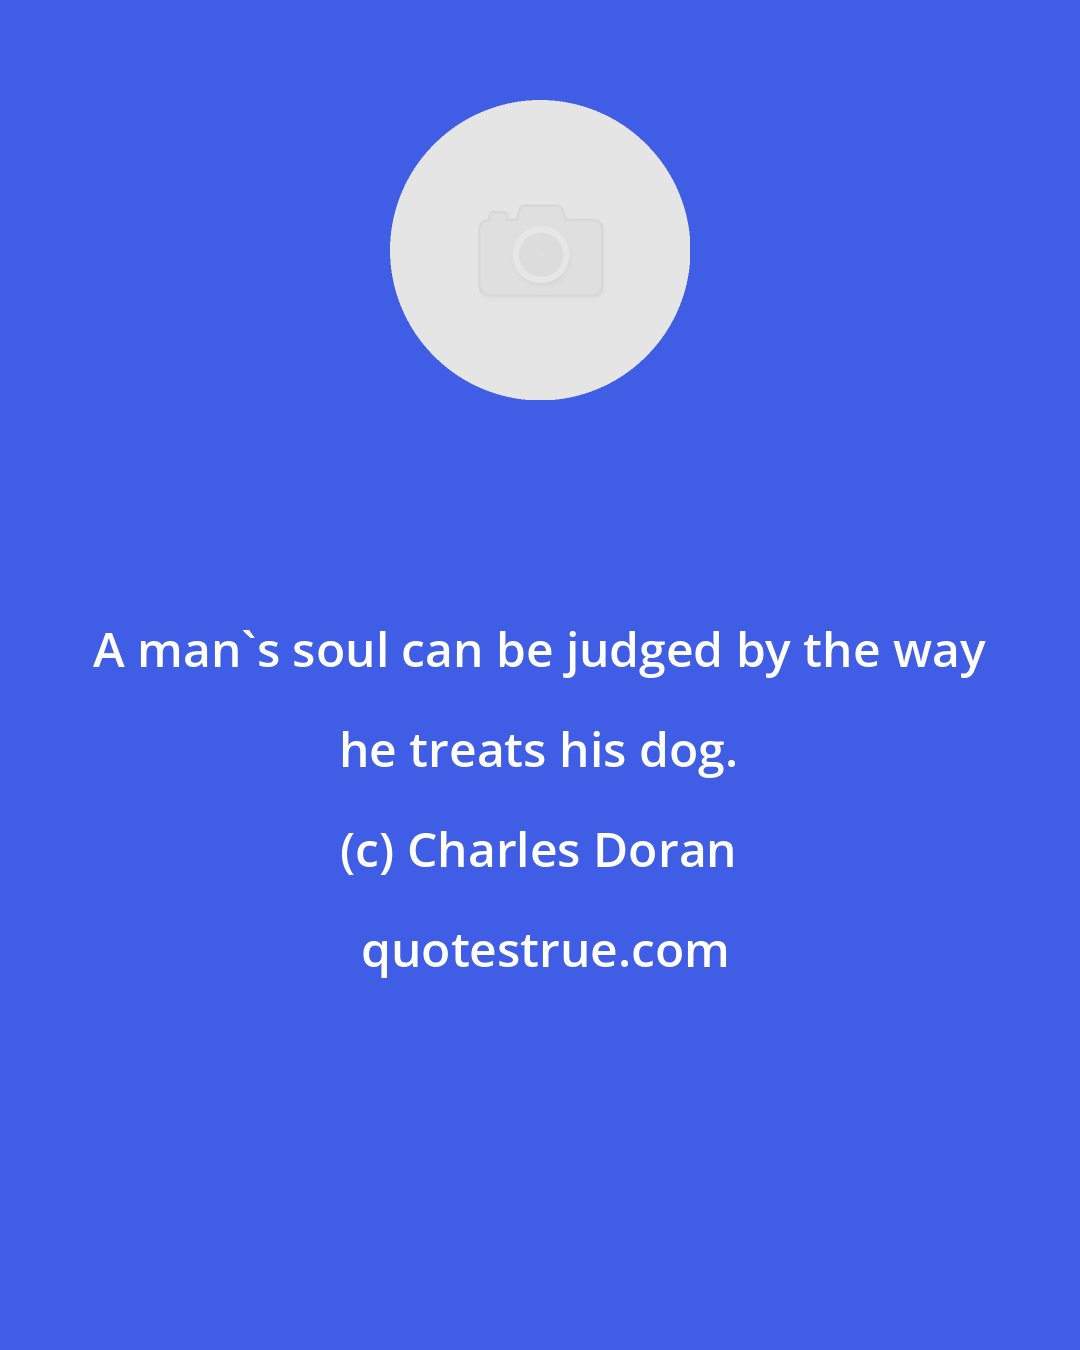 Charles Doran: A man's soul can be judged by the way he treats his dog.